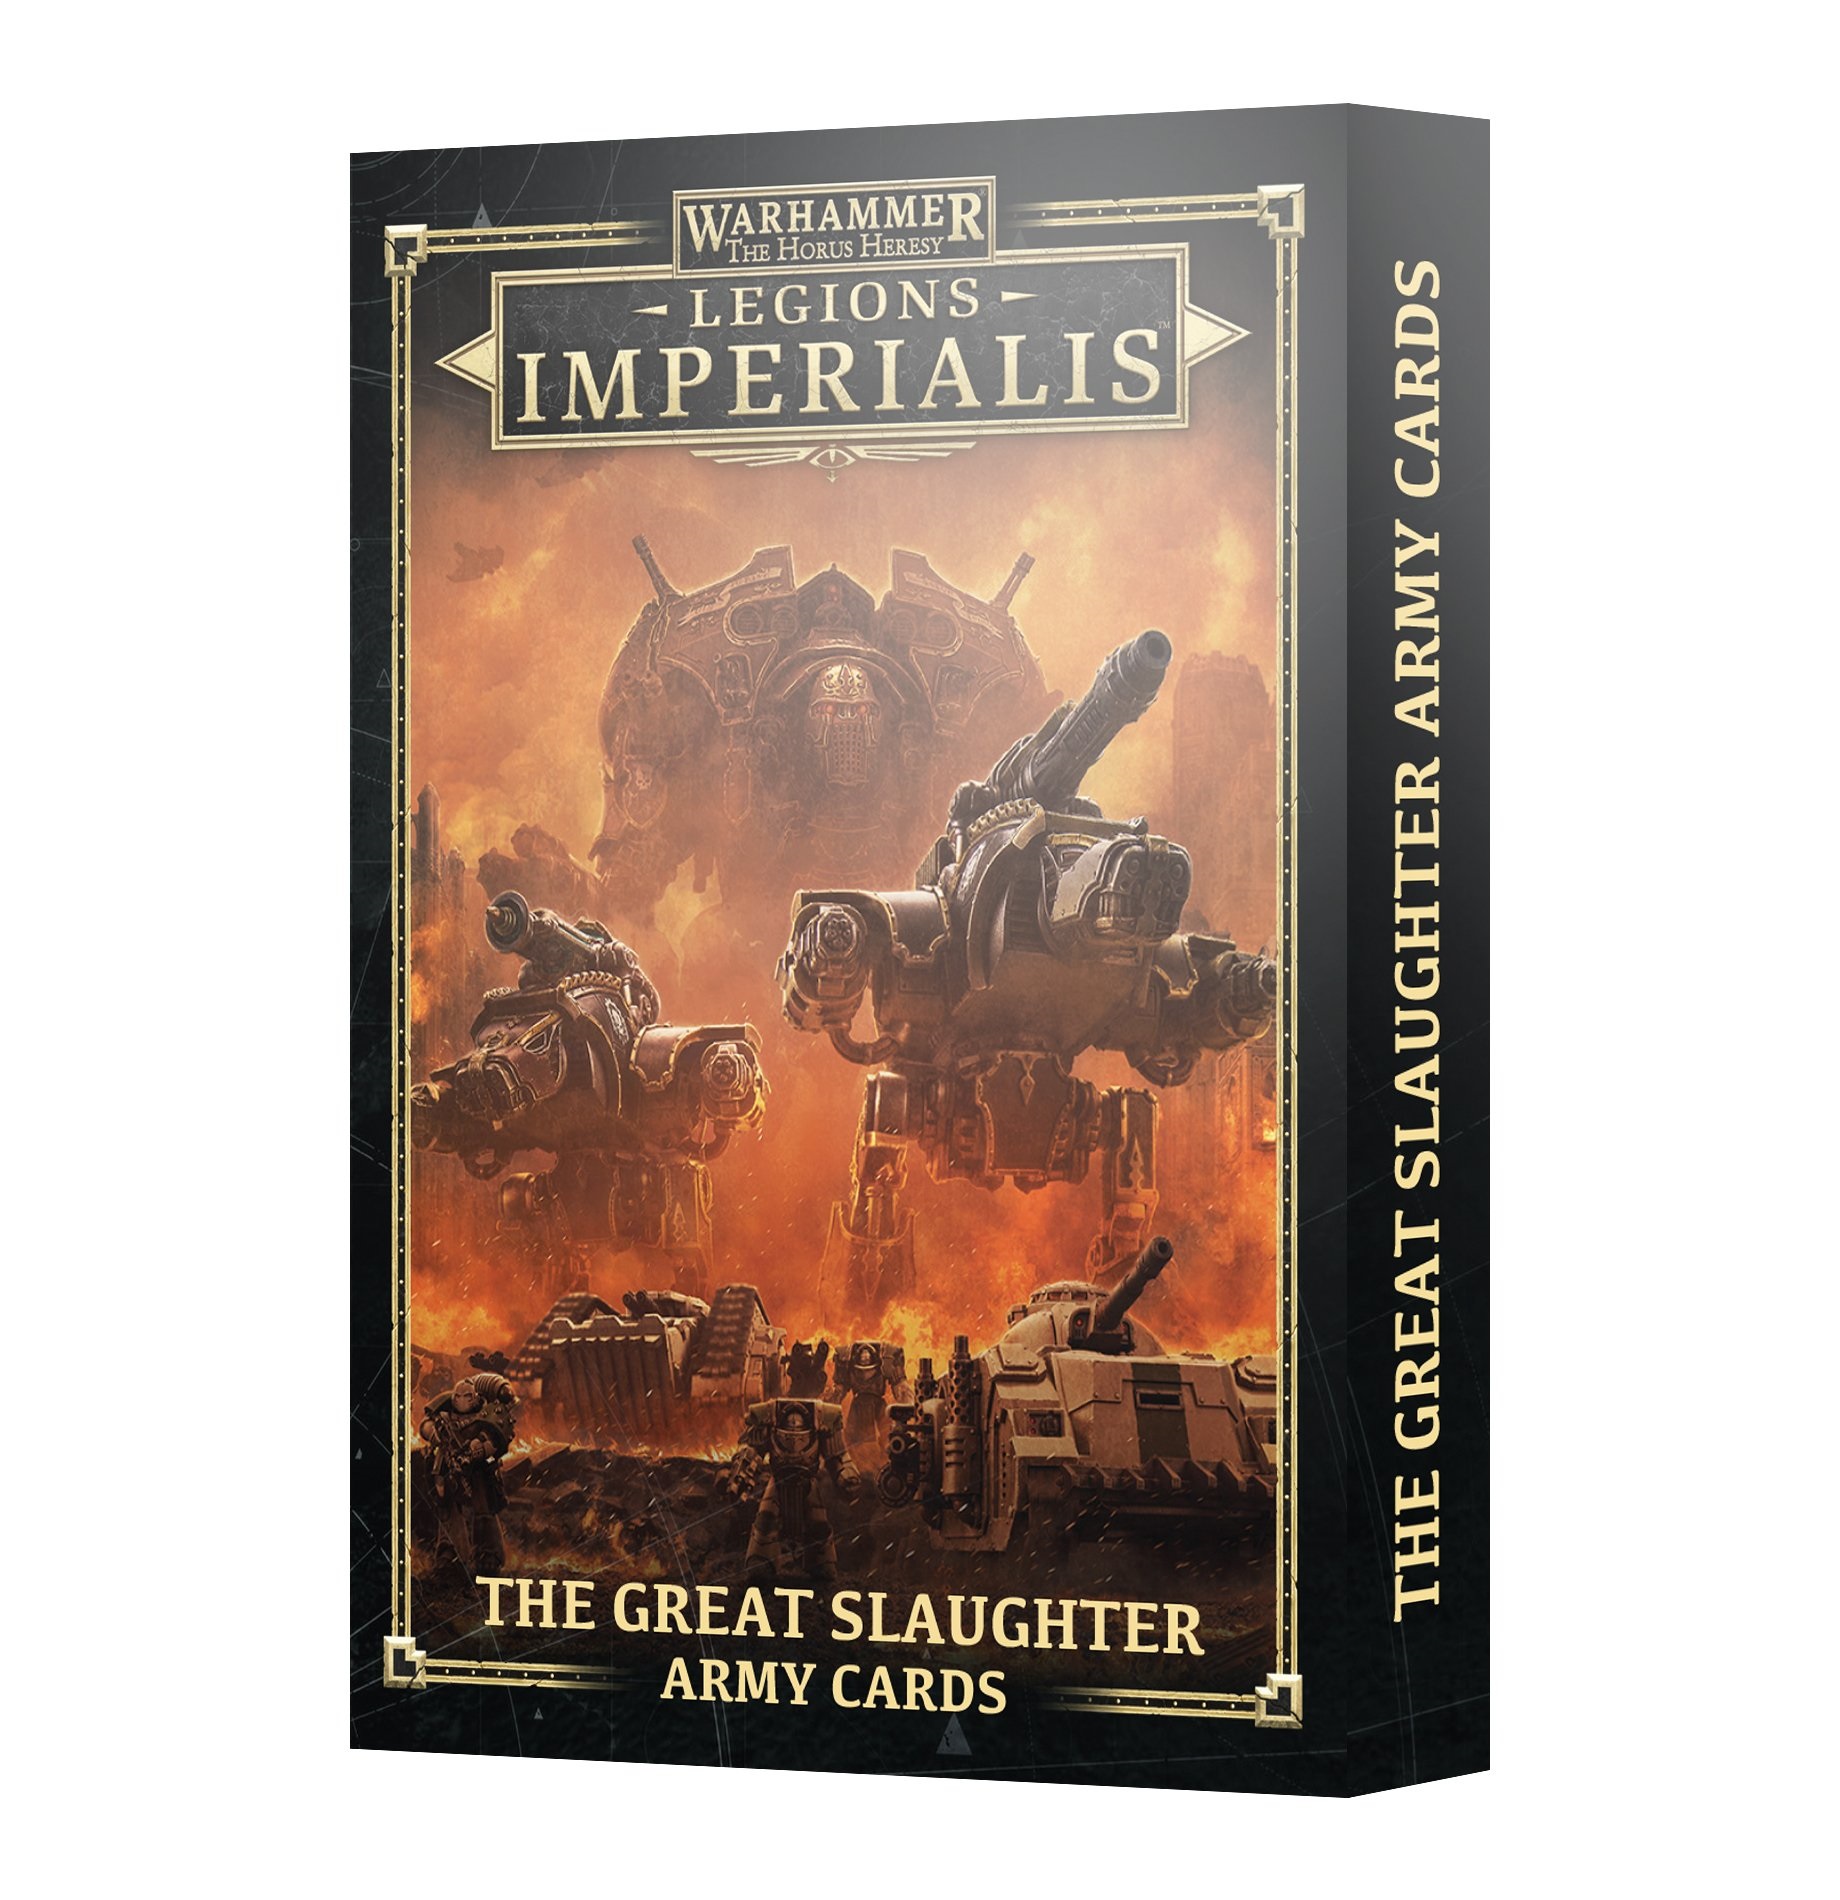 Legion Imperialis: The Great Slaughter Army Cards - SOLD OUT